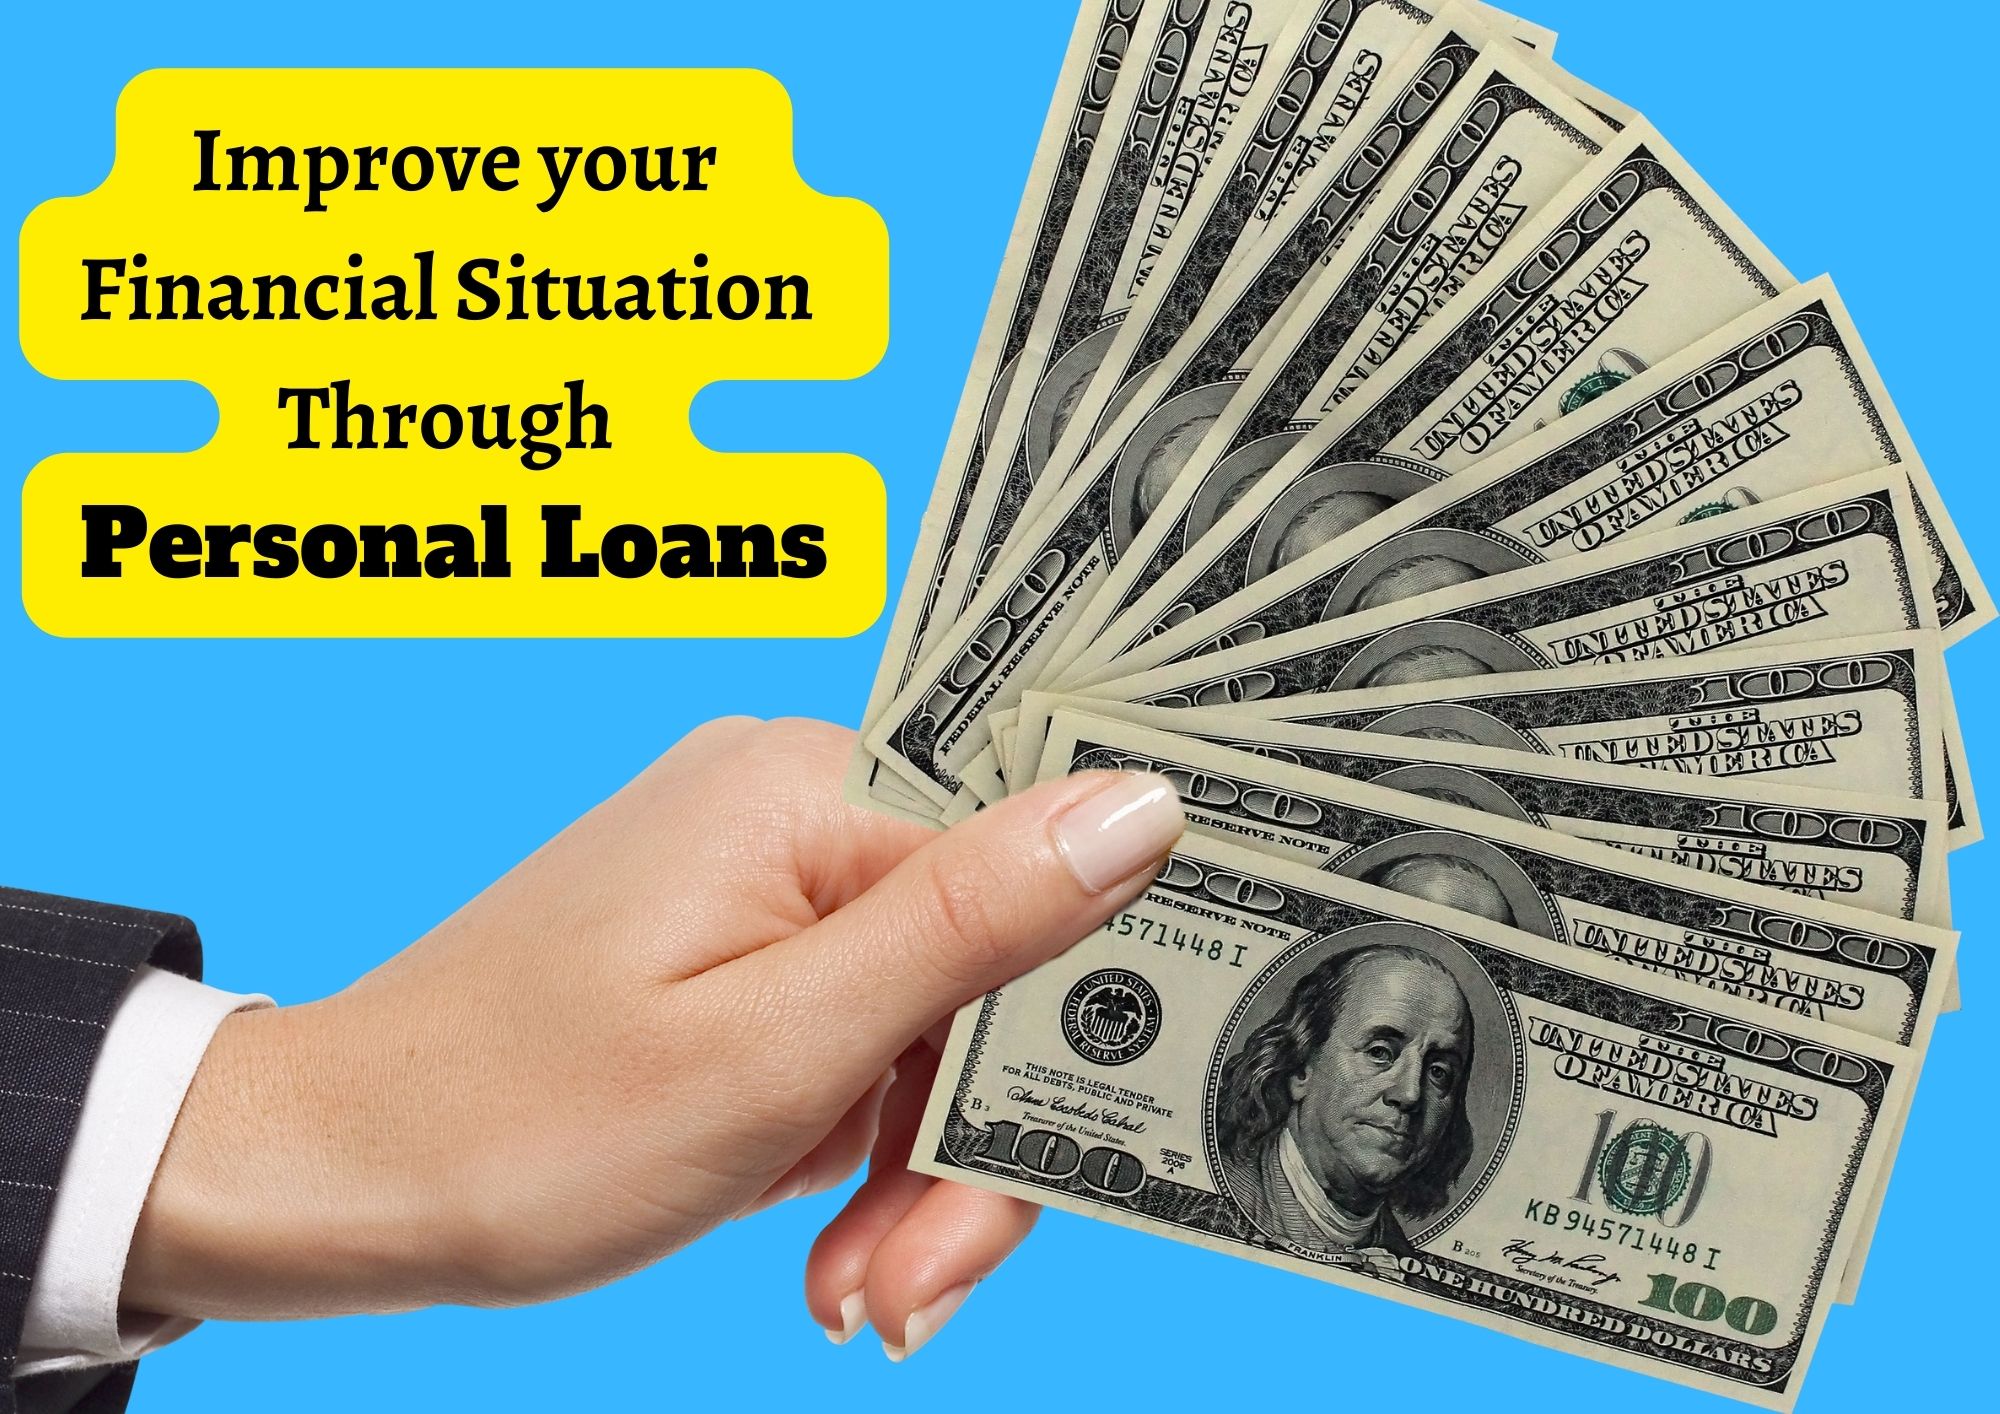 How to Properly Improve your Financial SItuation Through Personal Loans